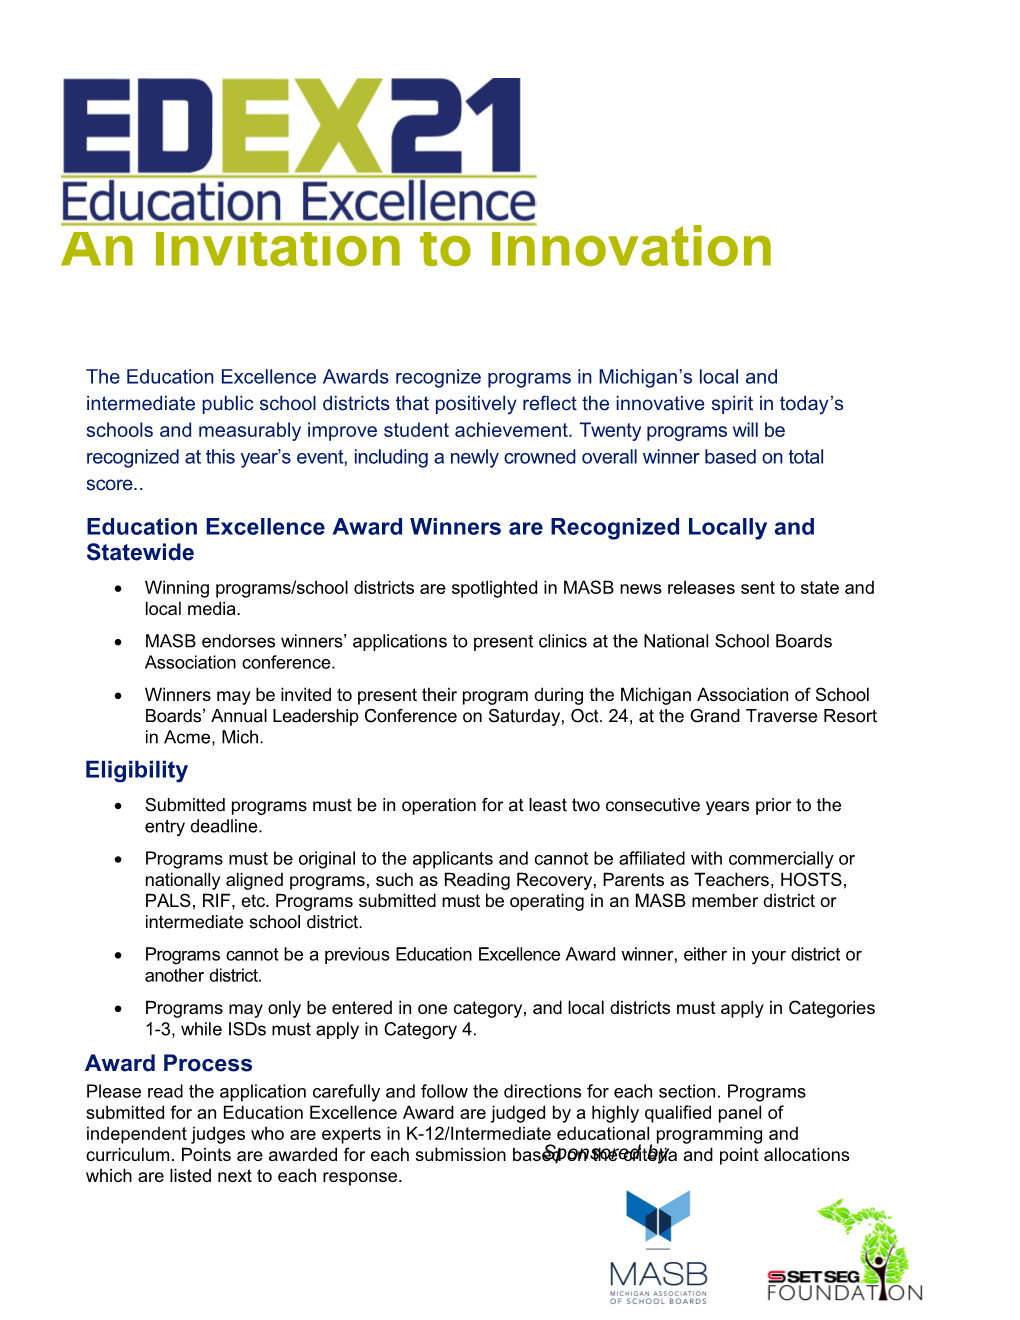 Education Excellence Award Winners Are Recognized Locally and Statewide